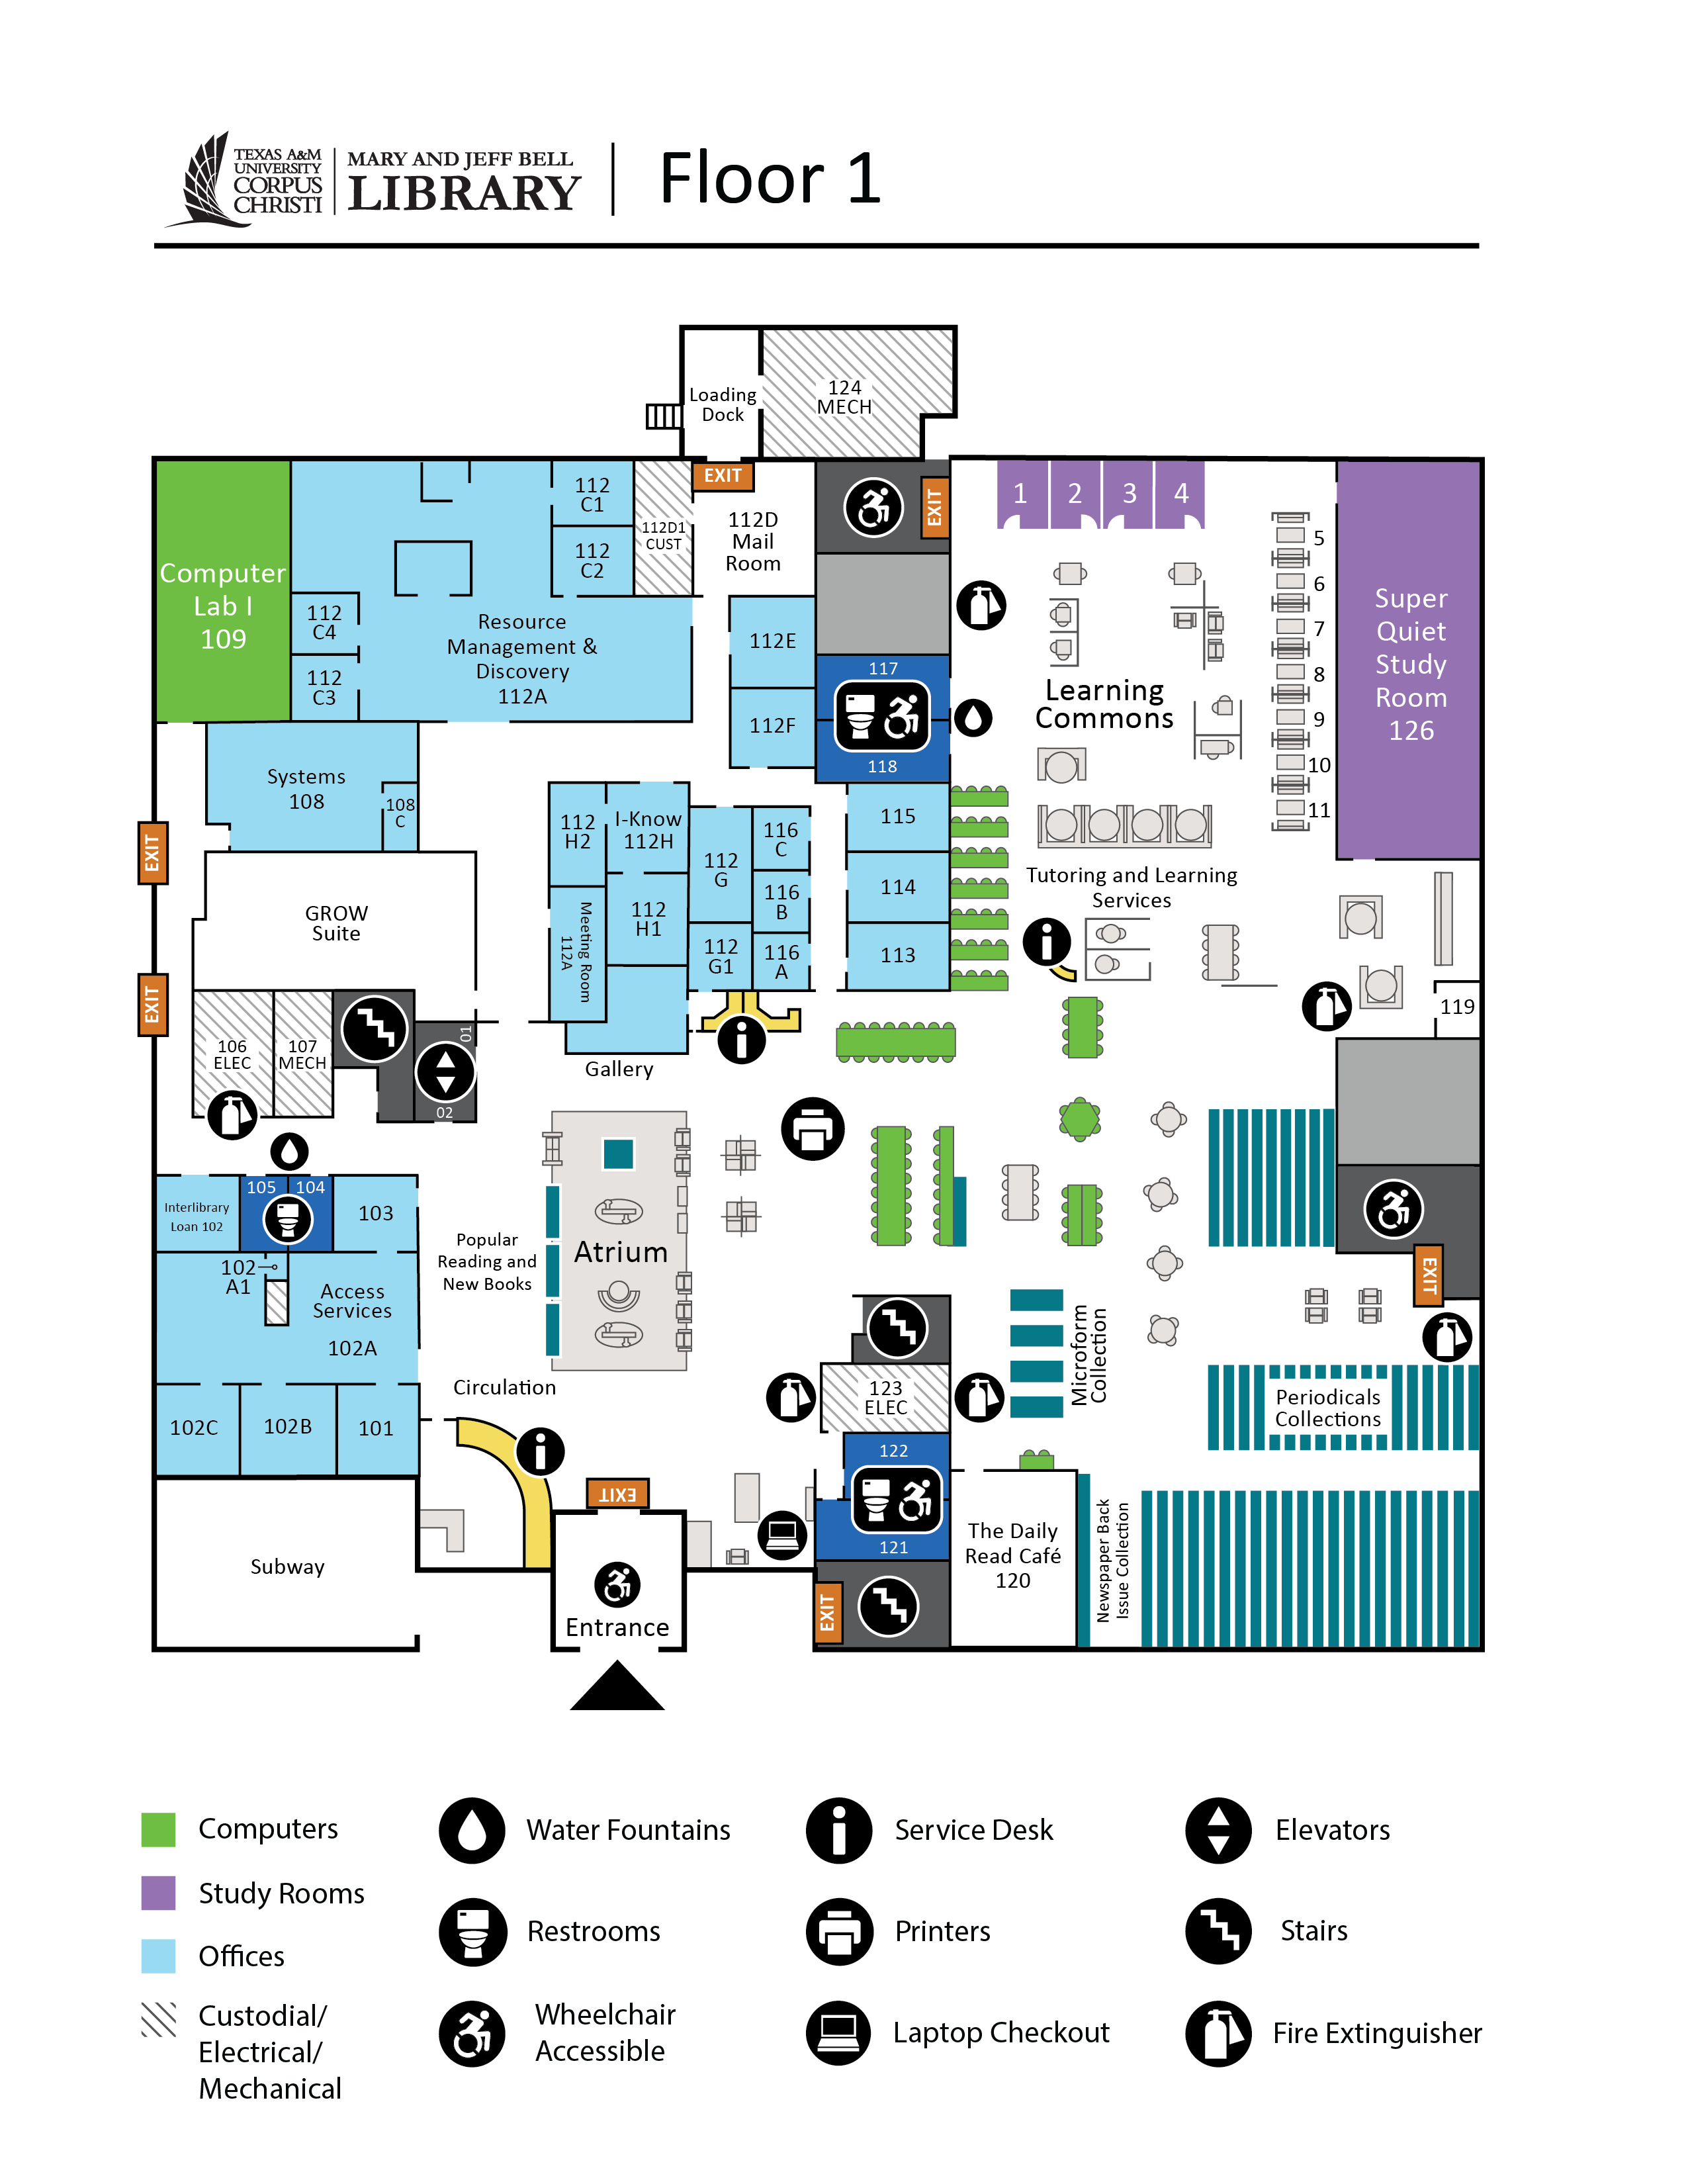 Bell Library map of first floor